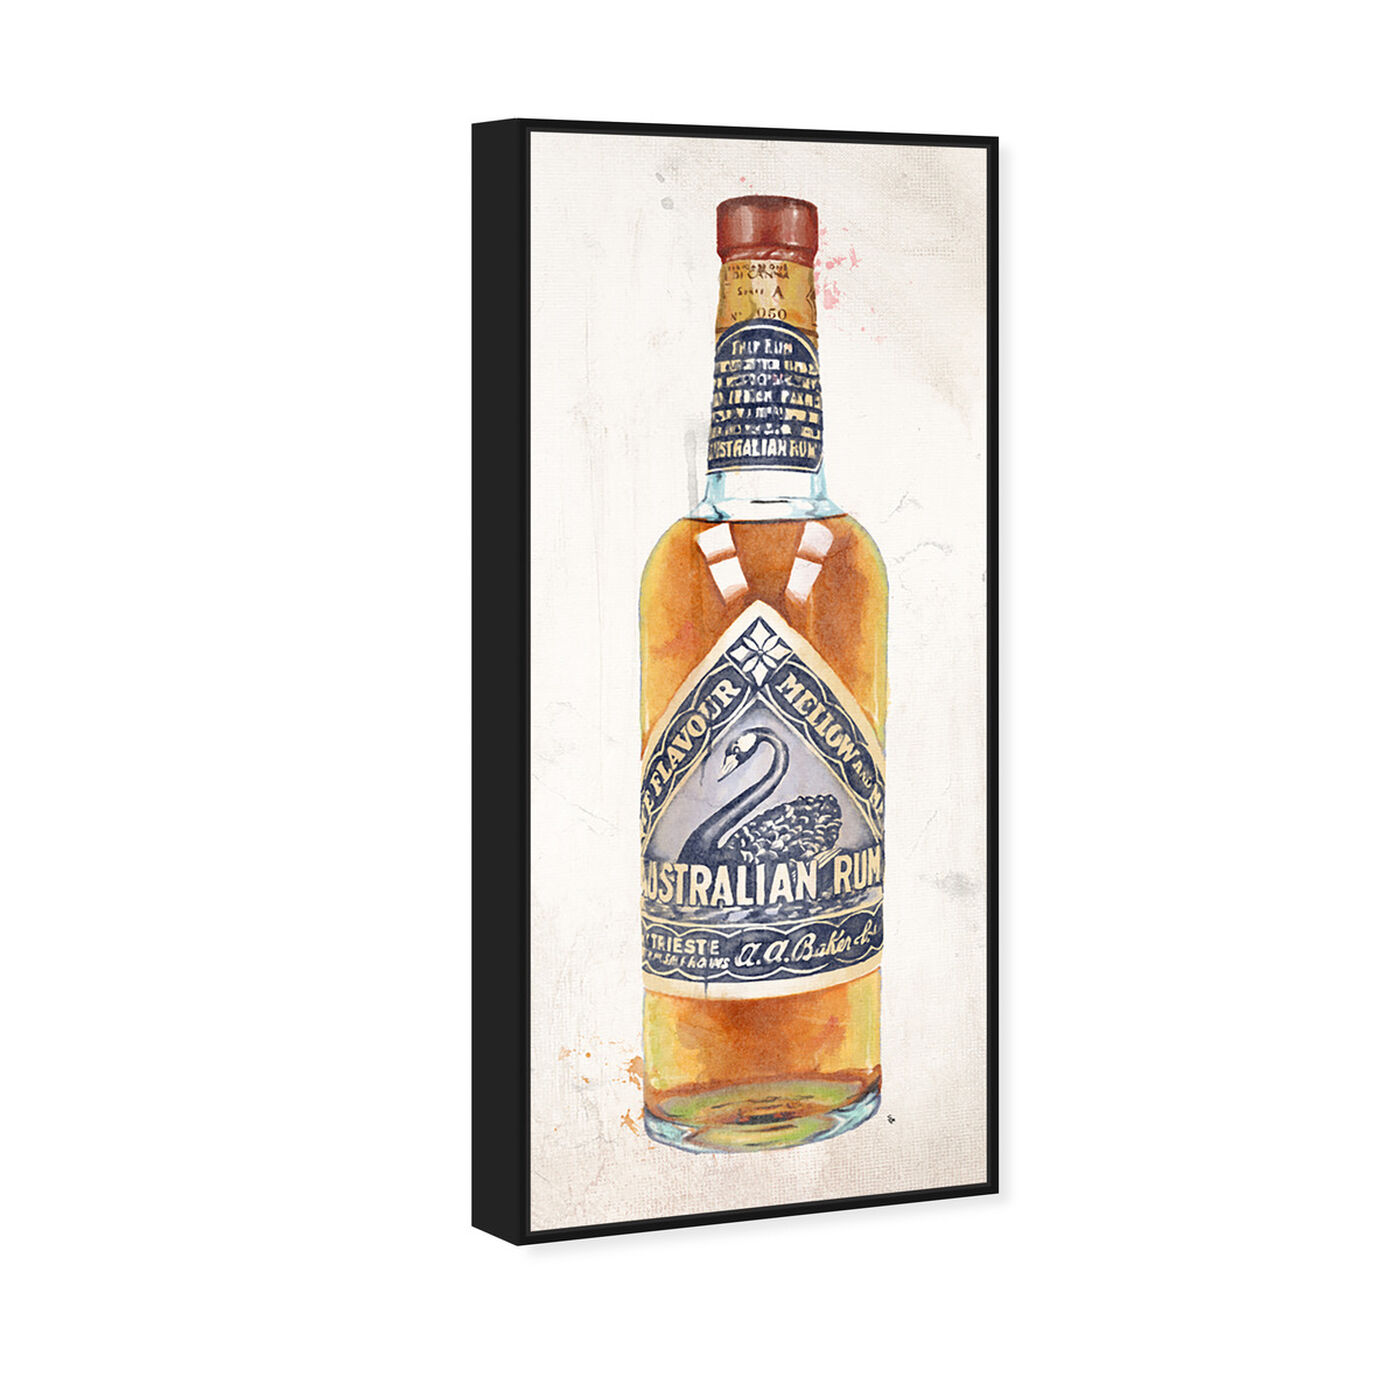 Angled view of Australian Rum featuring drinks and spirits and liquor art.